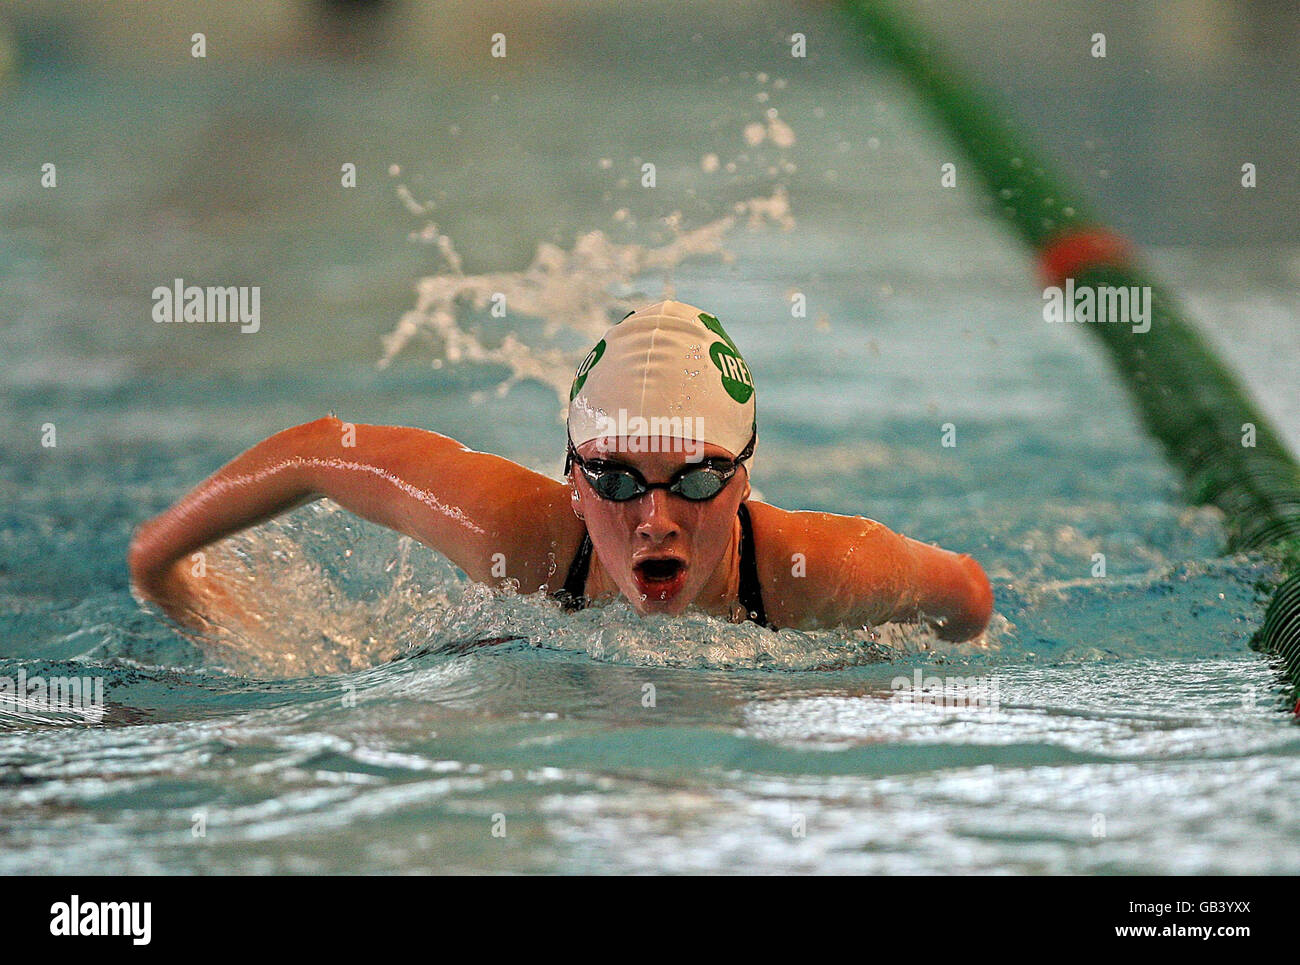 Paralympics - Beijing Paralympic Games 2008. Republic of Ireland's Swimmer Ellen Carol Keane during training at the National Aquatics Centre in Beijing, China. Stock Photo